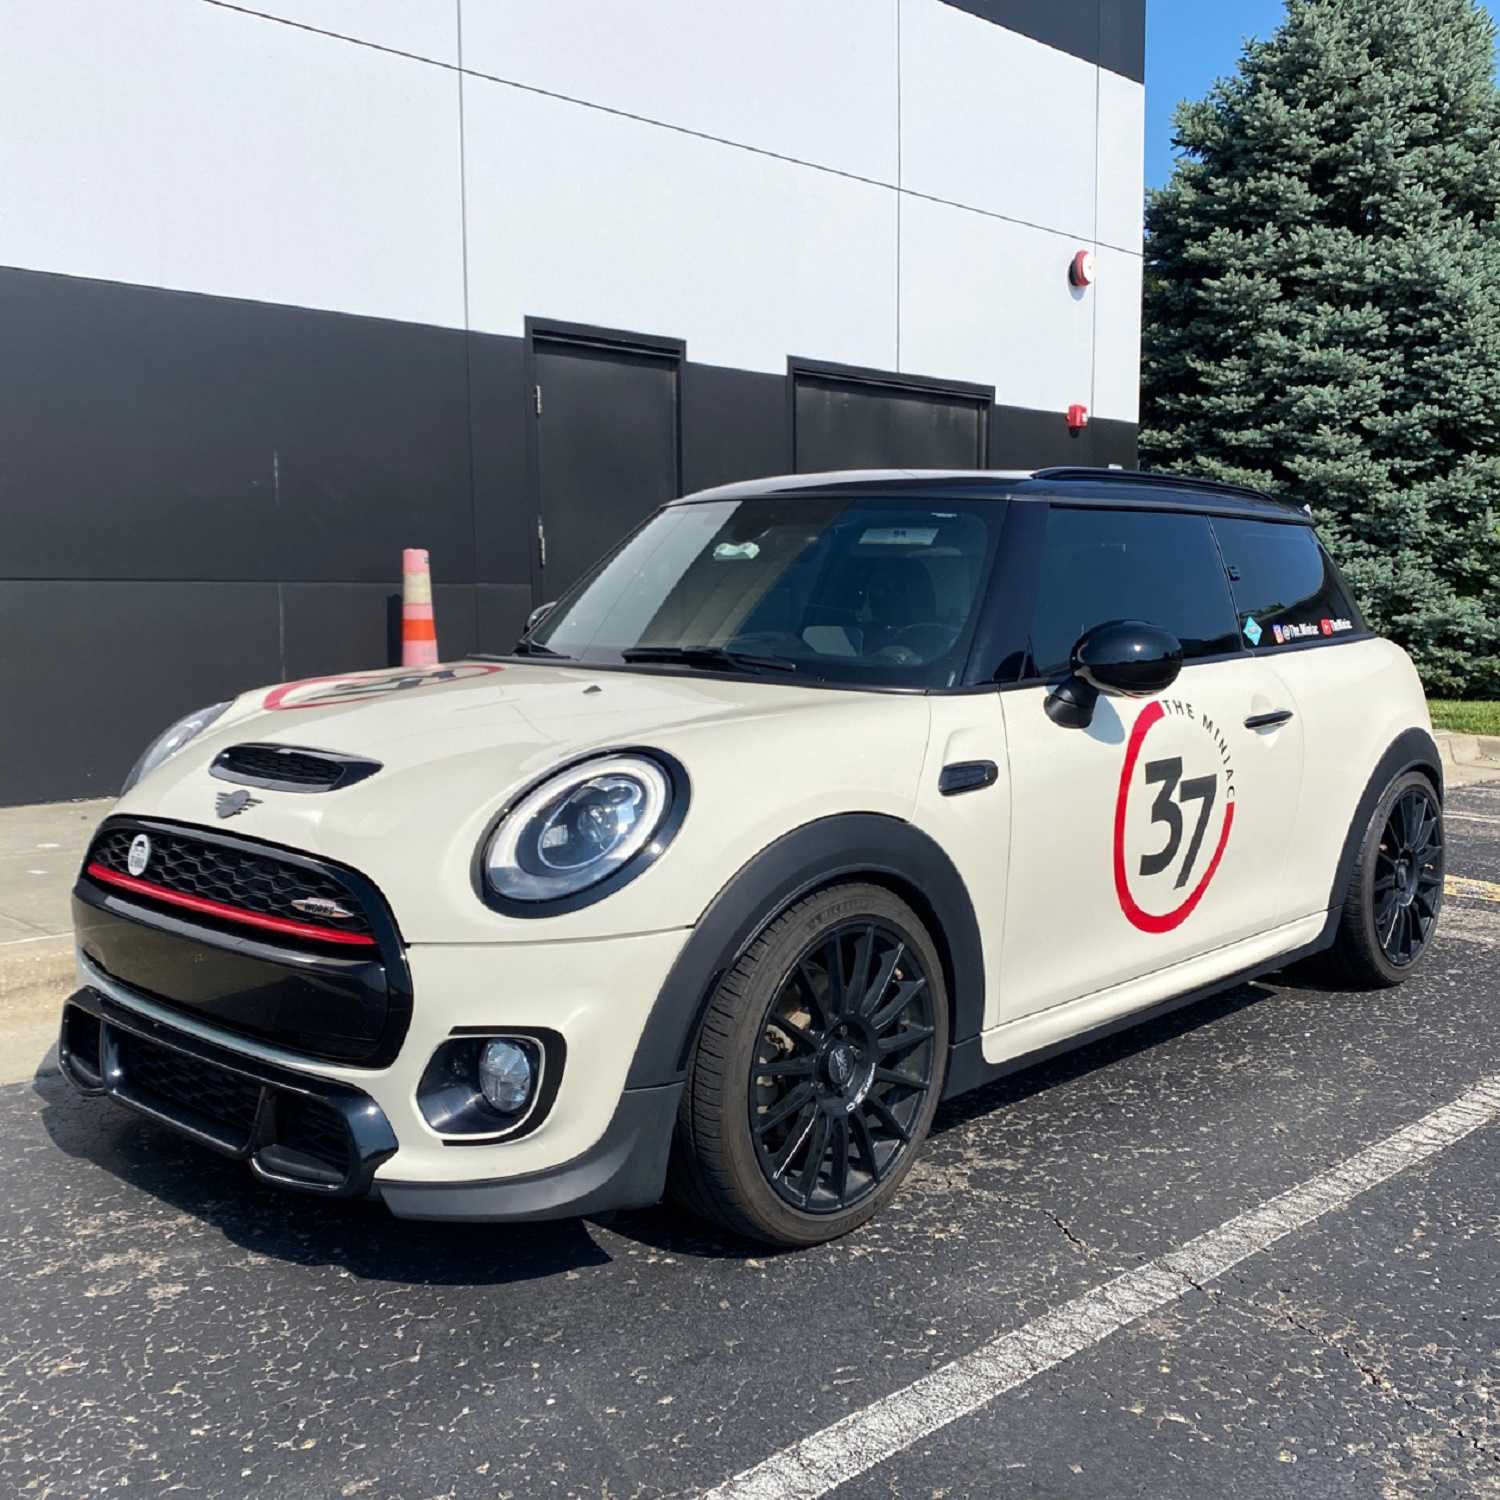 MINI USA ASKS COMMUNITY TO SHARE THEIR CUSTOMIZED MINI VEHICLES AND ...